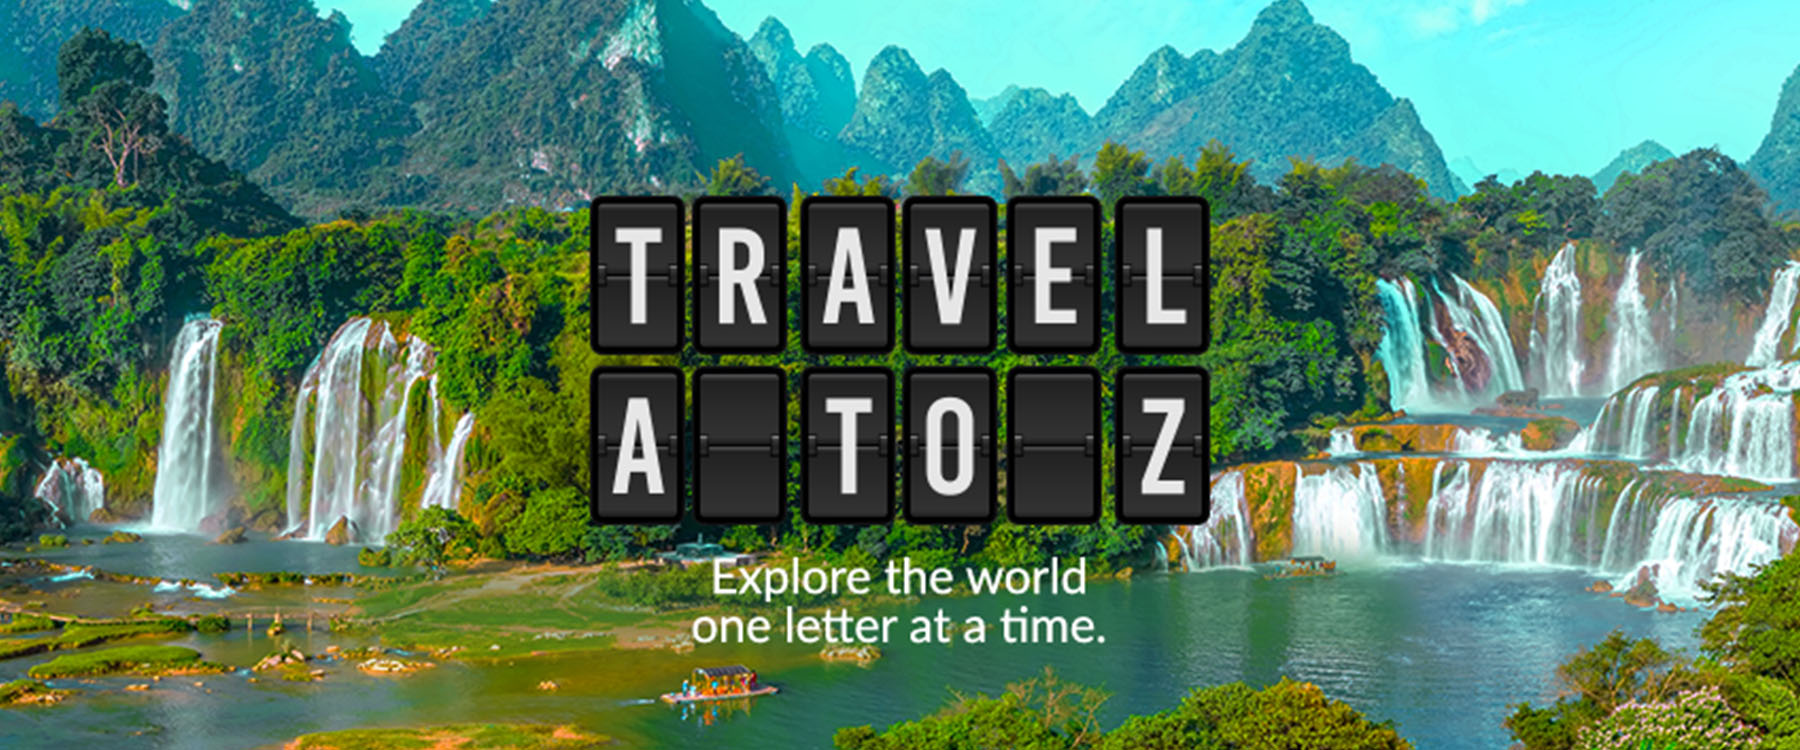 Travel A to Z campaign